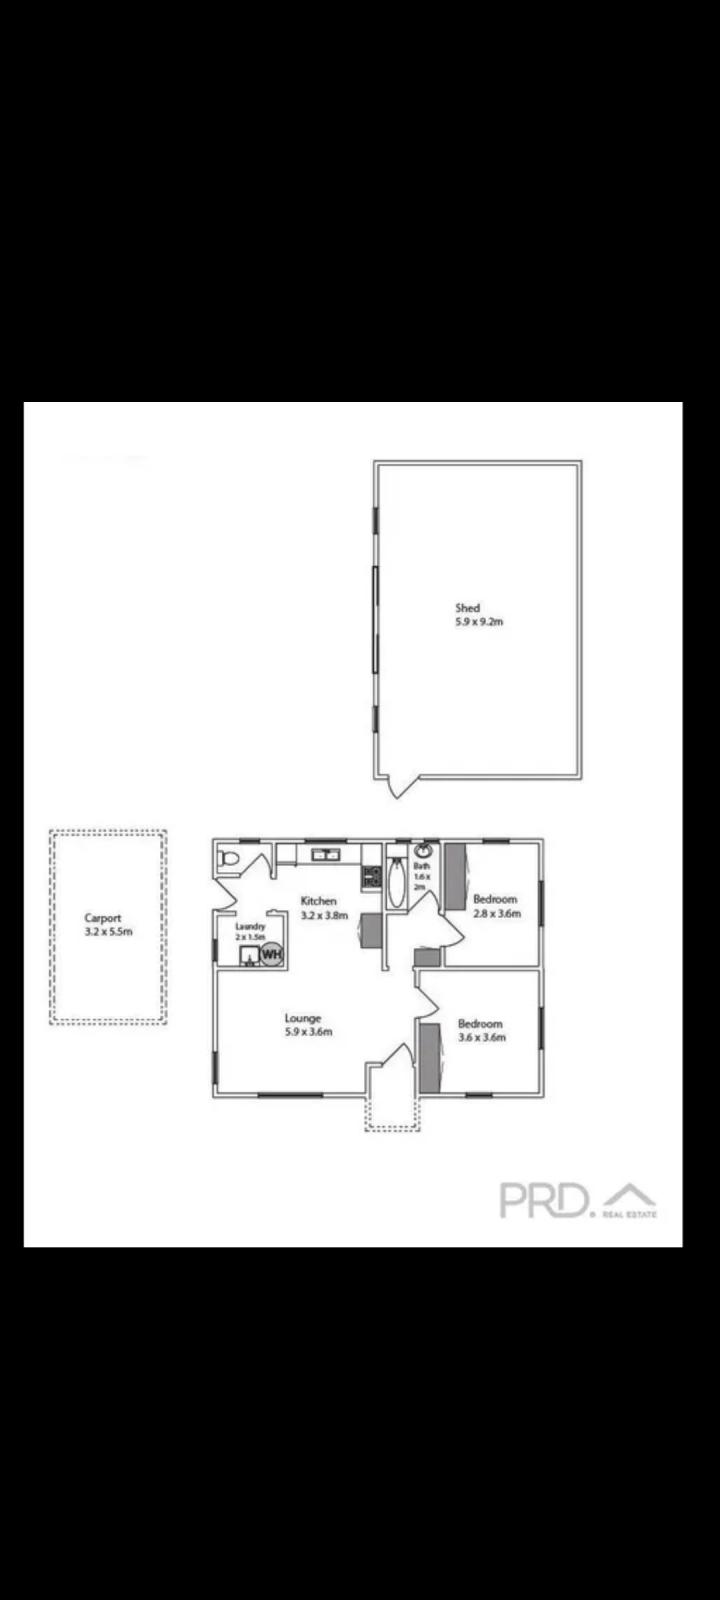 Extension from 2 bedroom to 3 bedroom